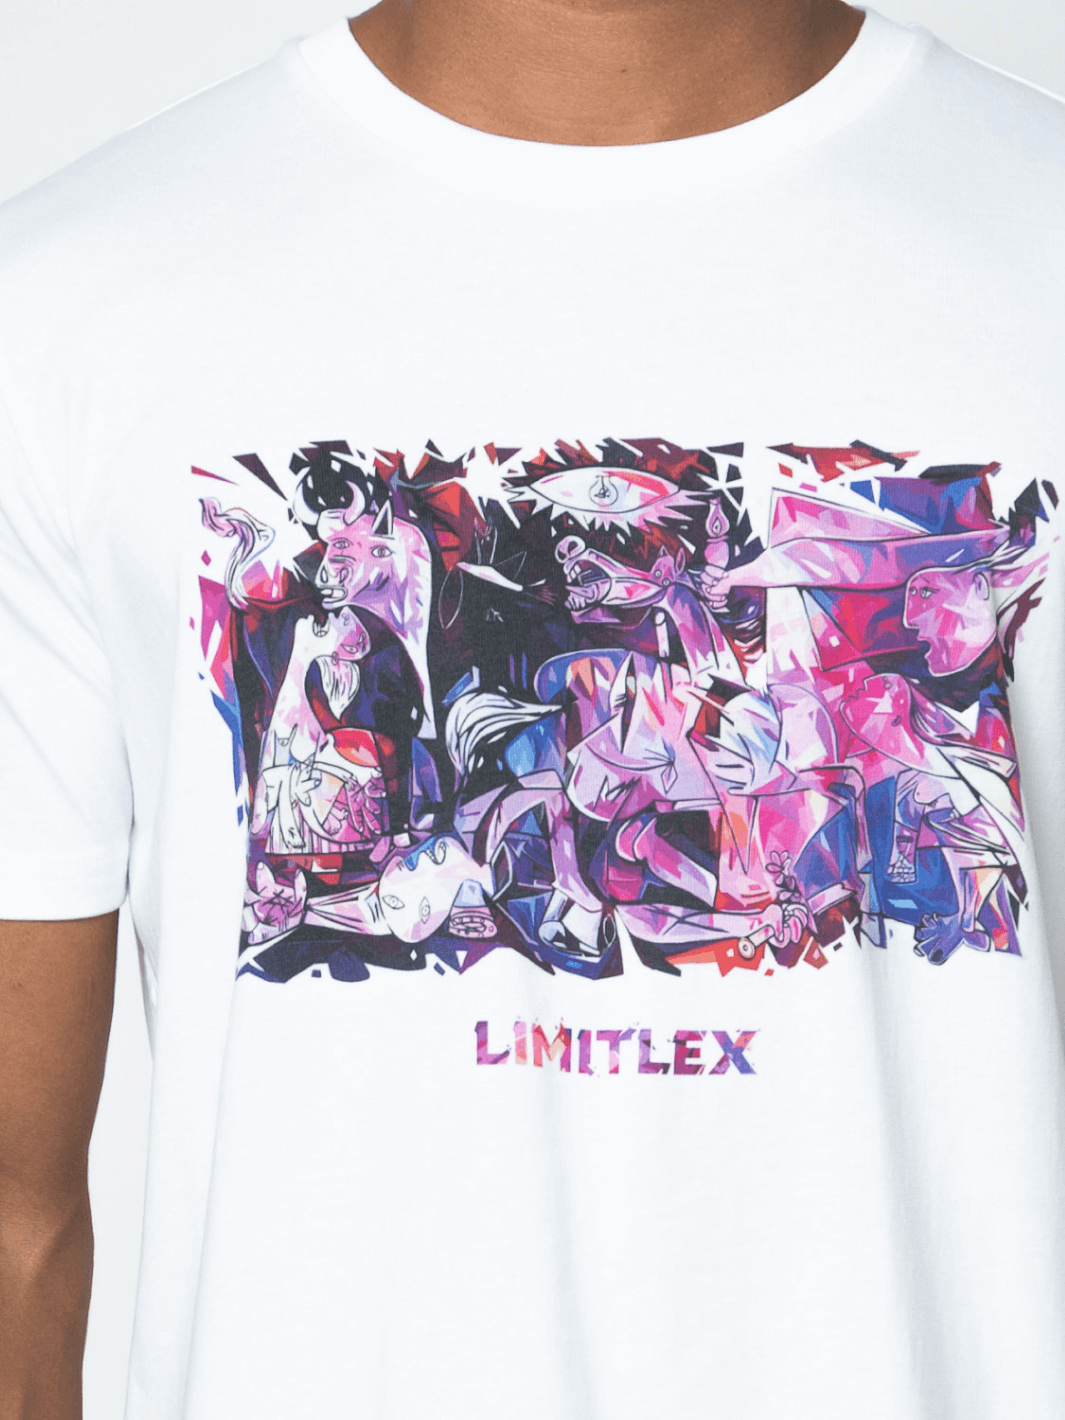 Zoom t-shirt bianca Limitlex con stampa Guernica.